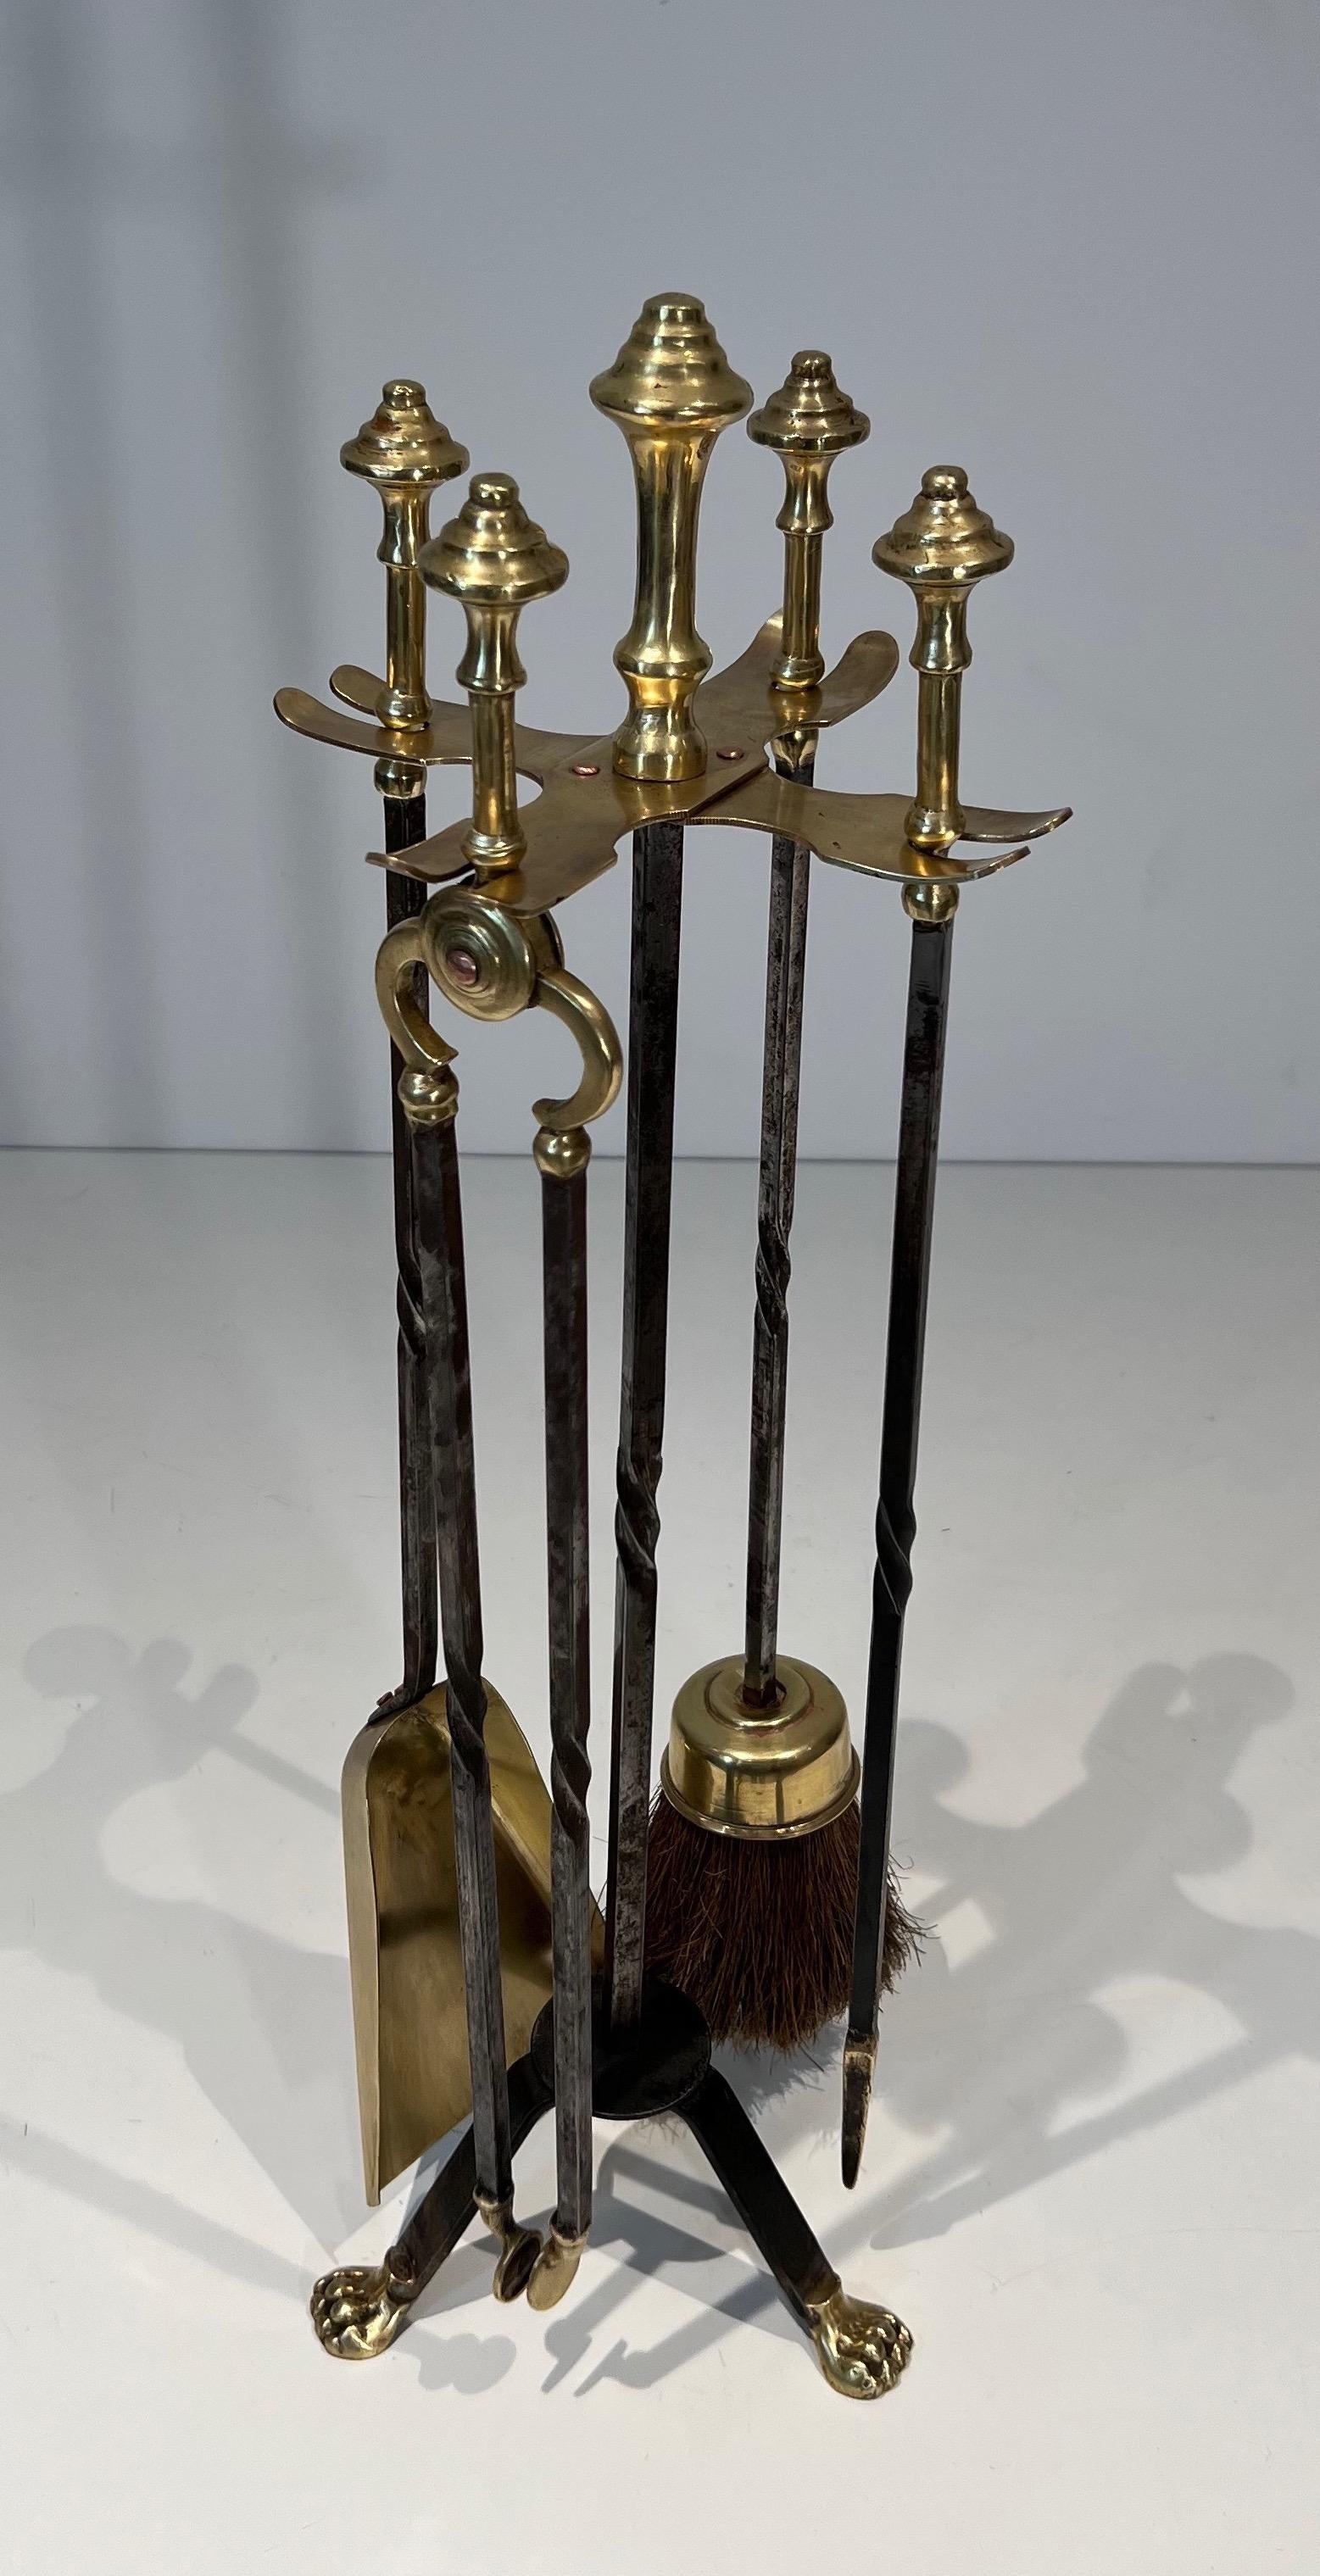 This very nice and rare neoclassical style fireplace tools on stand is made of brass and brushed steel . This is a French work attributed to Maison Jansen. Circa 1940